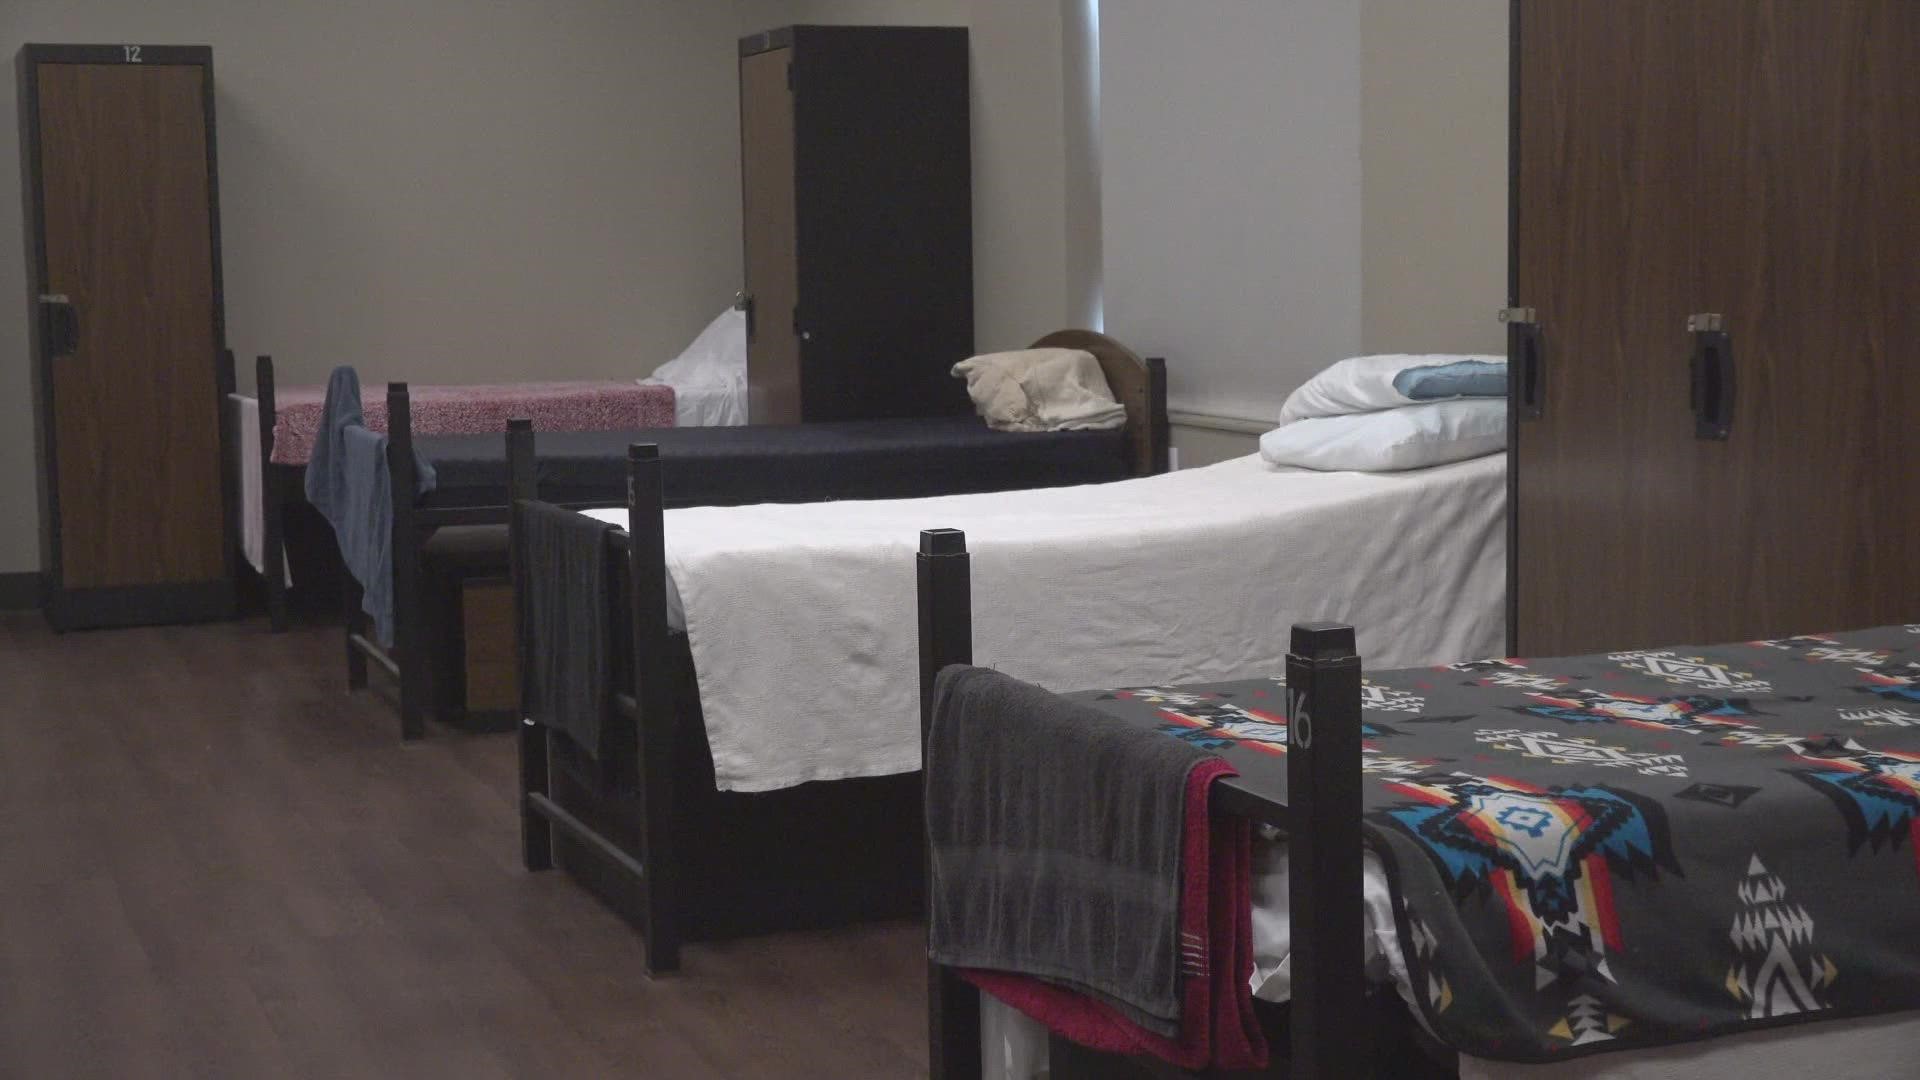 The warming center can hold up to 100 people thanks to donated sleeping cots.